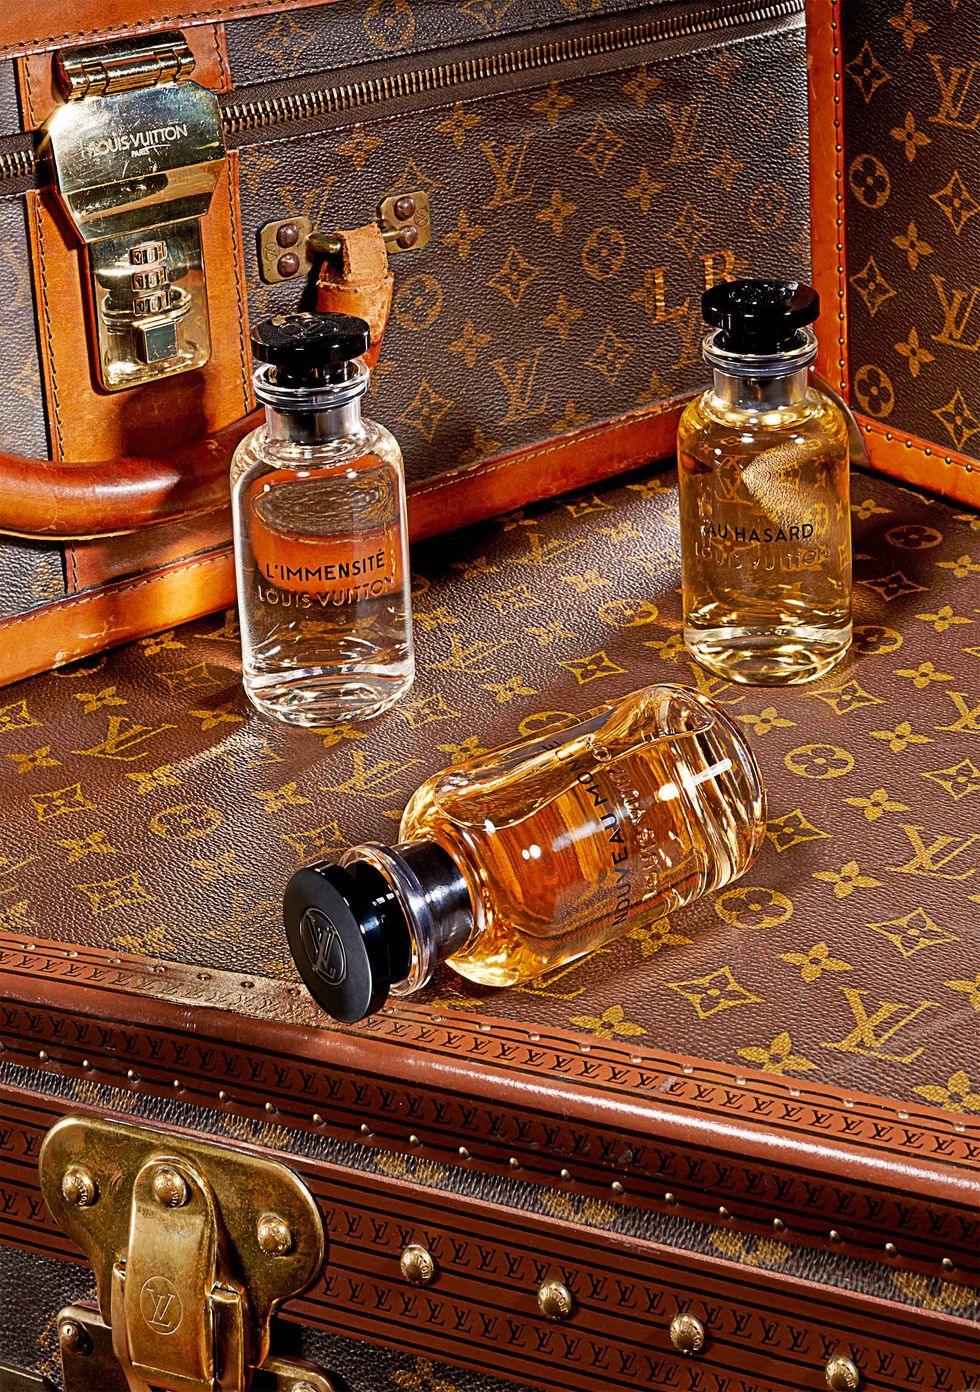 Here's How Louis Vuitton Makes a Next-Level Cologne